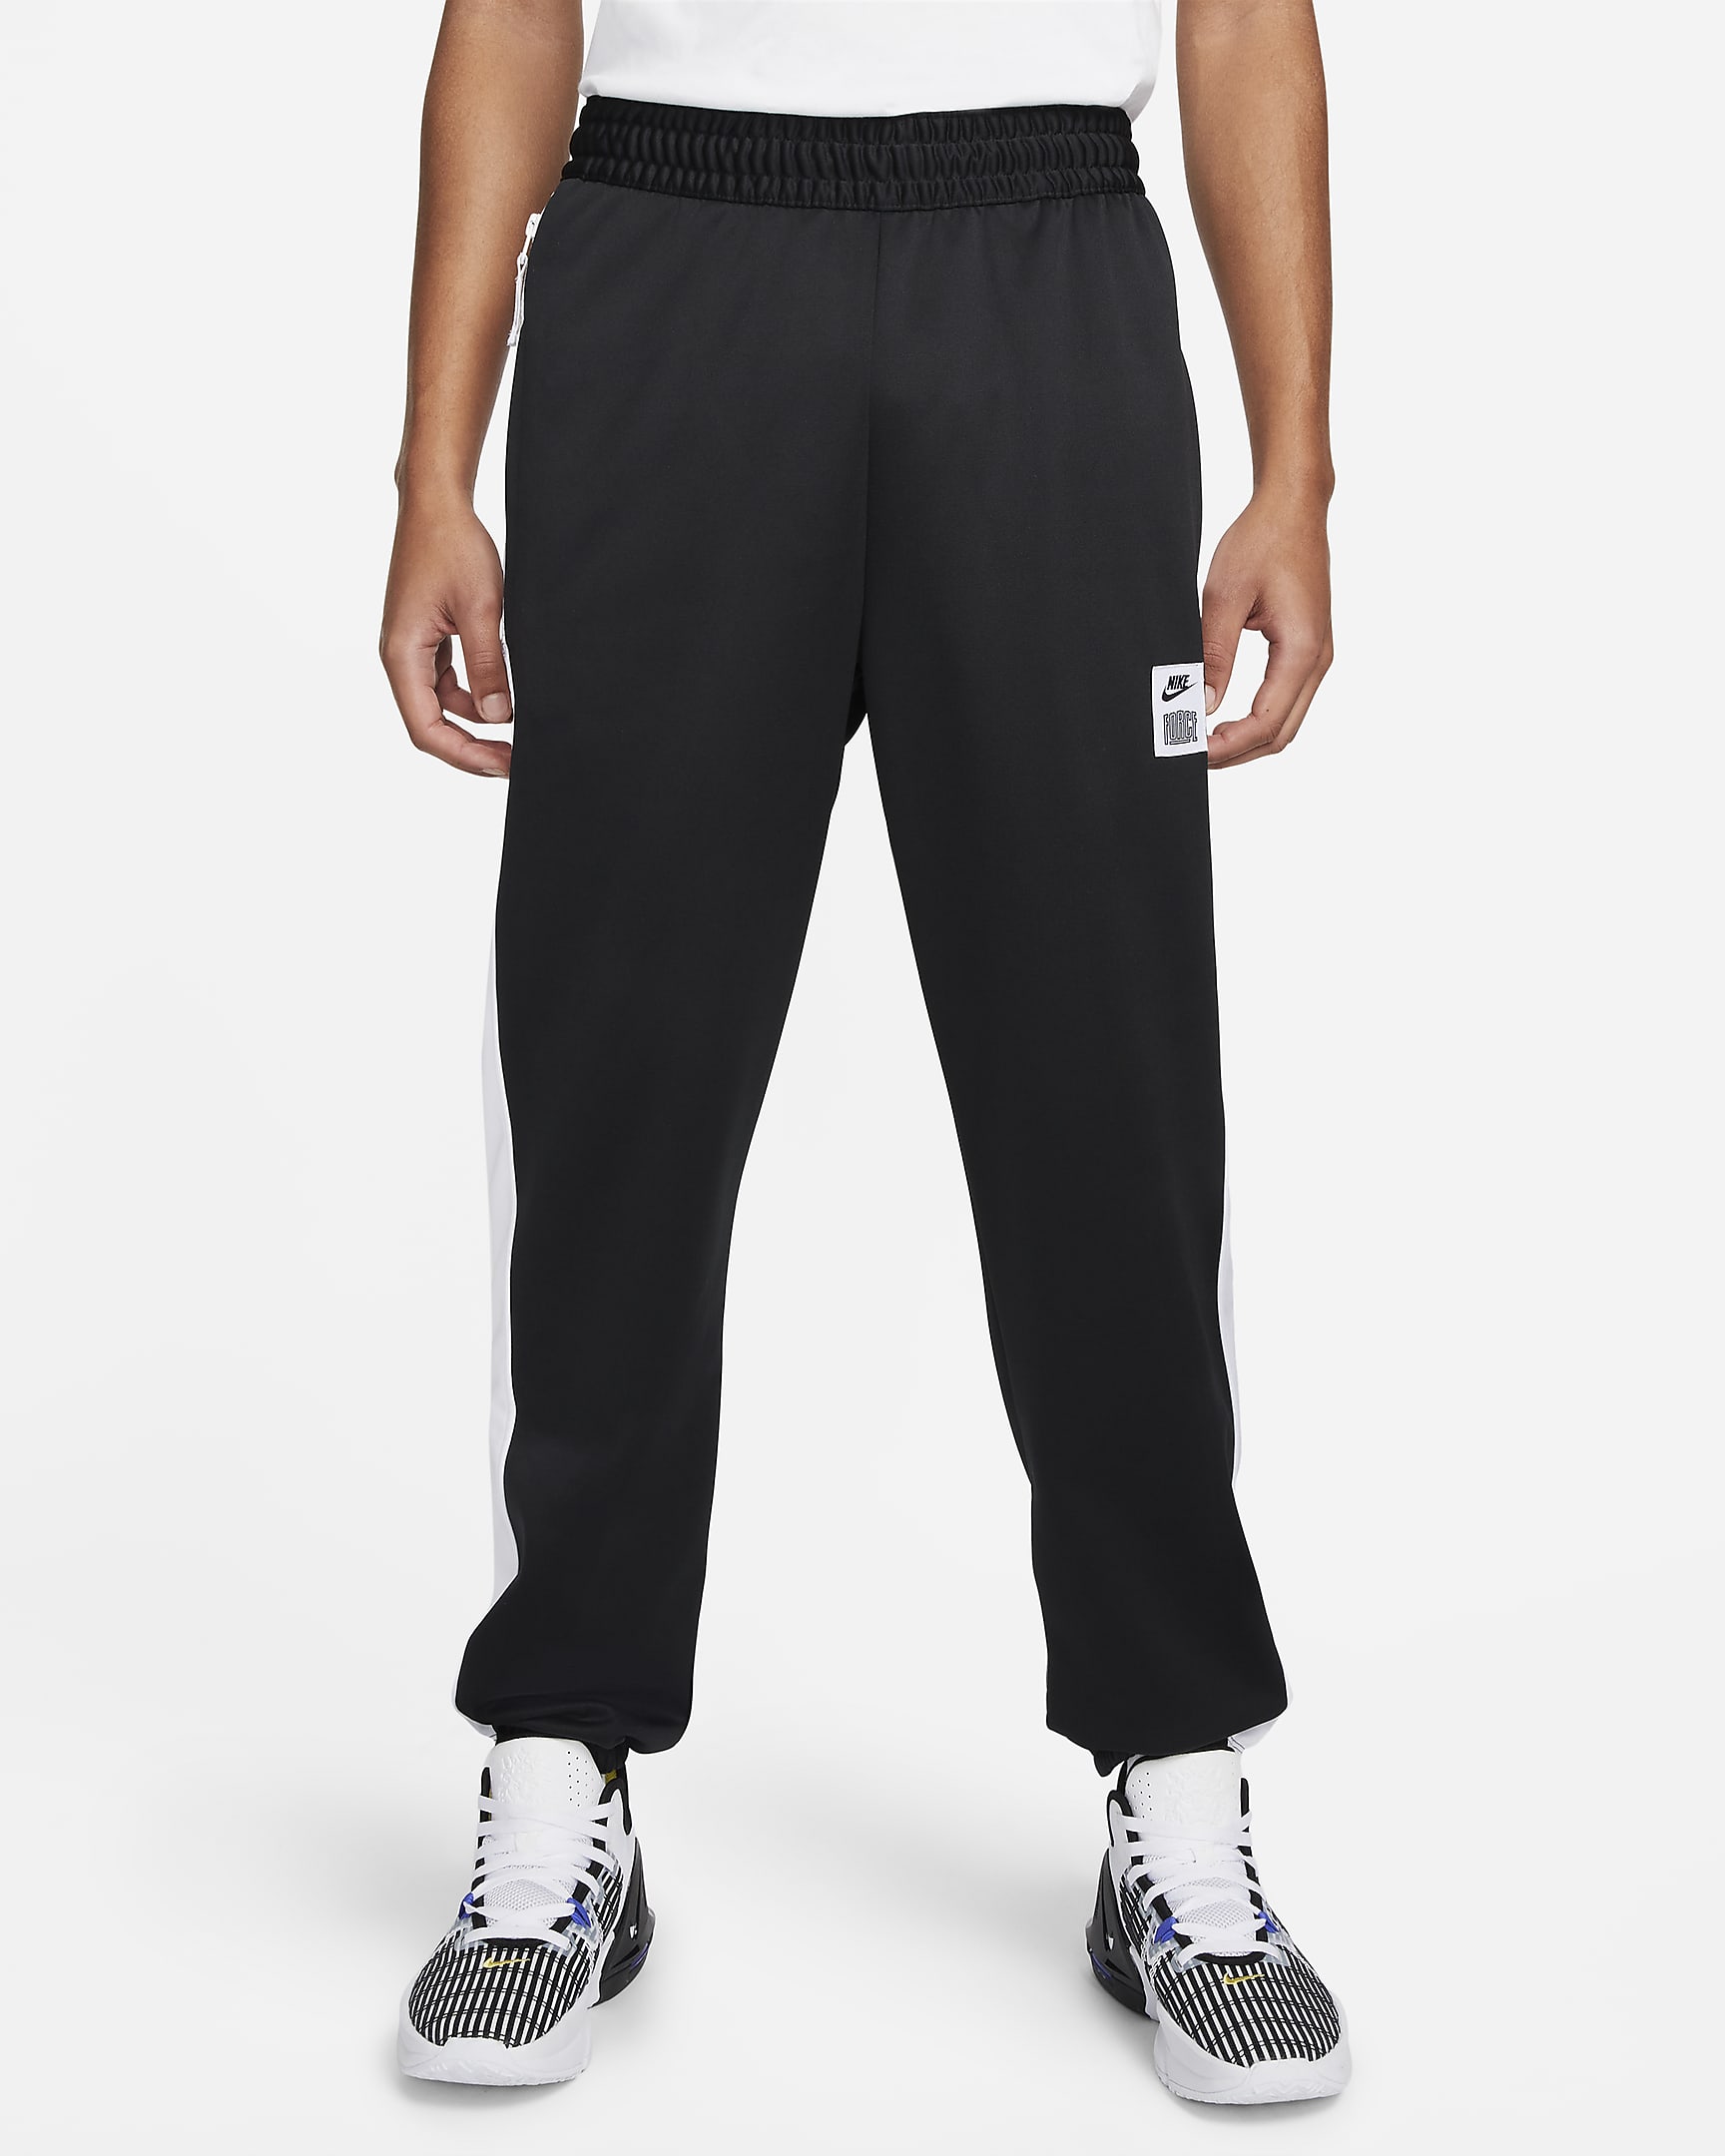 Nike Starting 5 Men's Therma-FIT Basketball Trousers. Nike IL